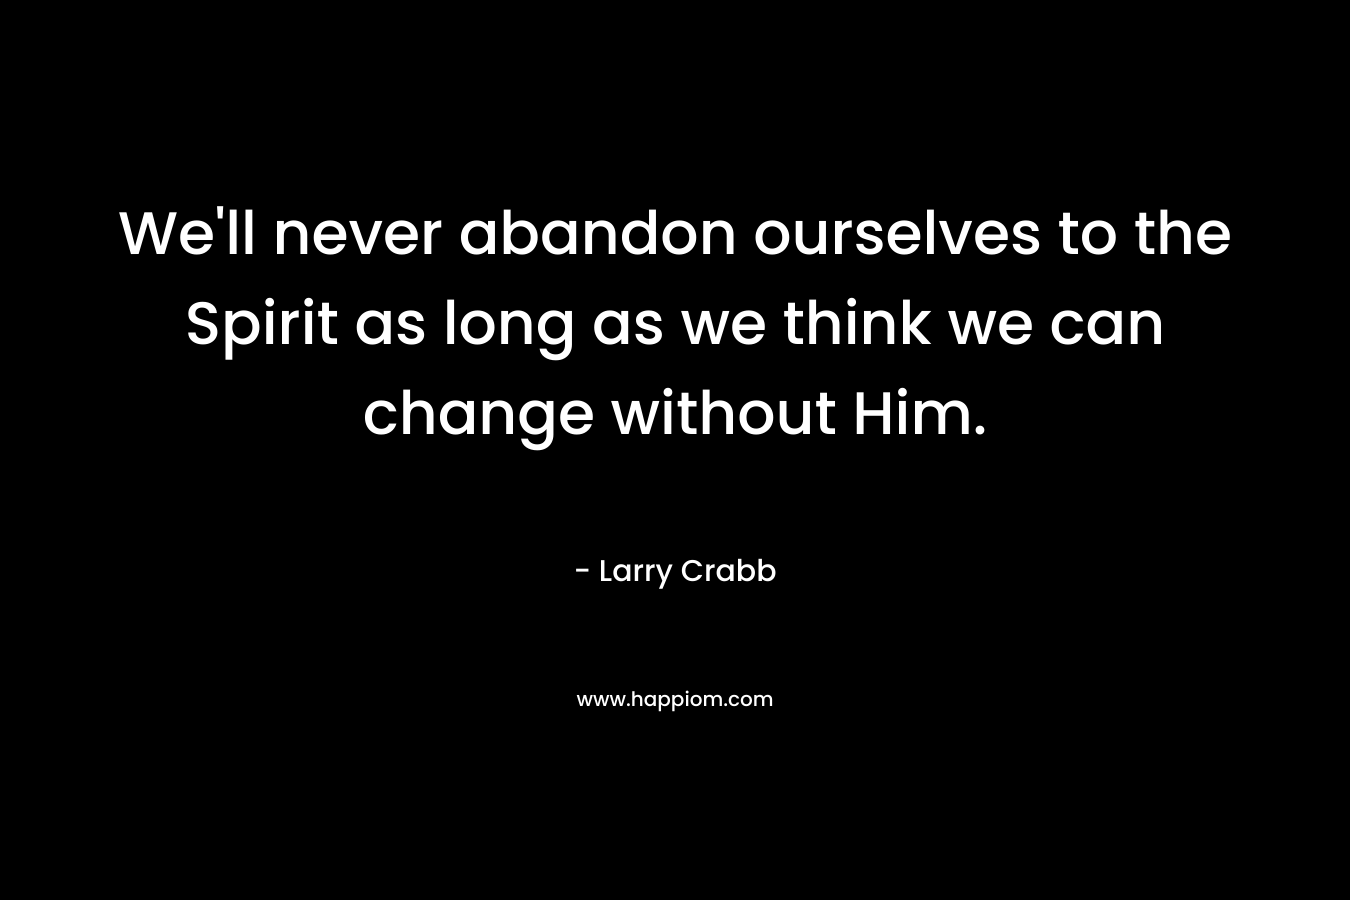 We’ll never abandon ourselves to the Spirit as long as we think we can change without Him. – Larry Crabb